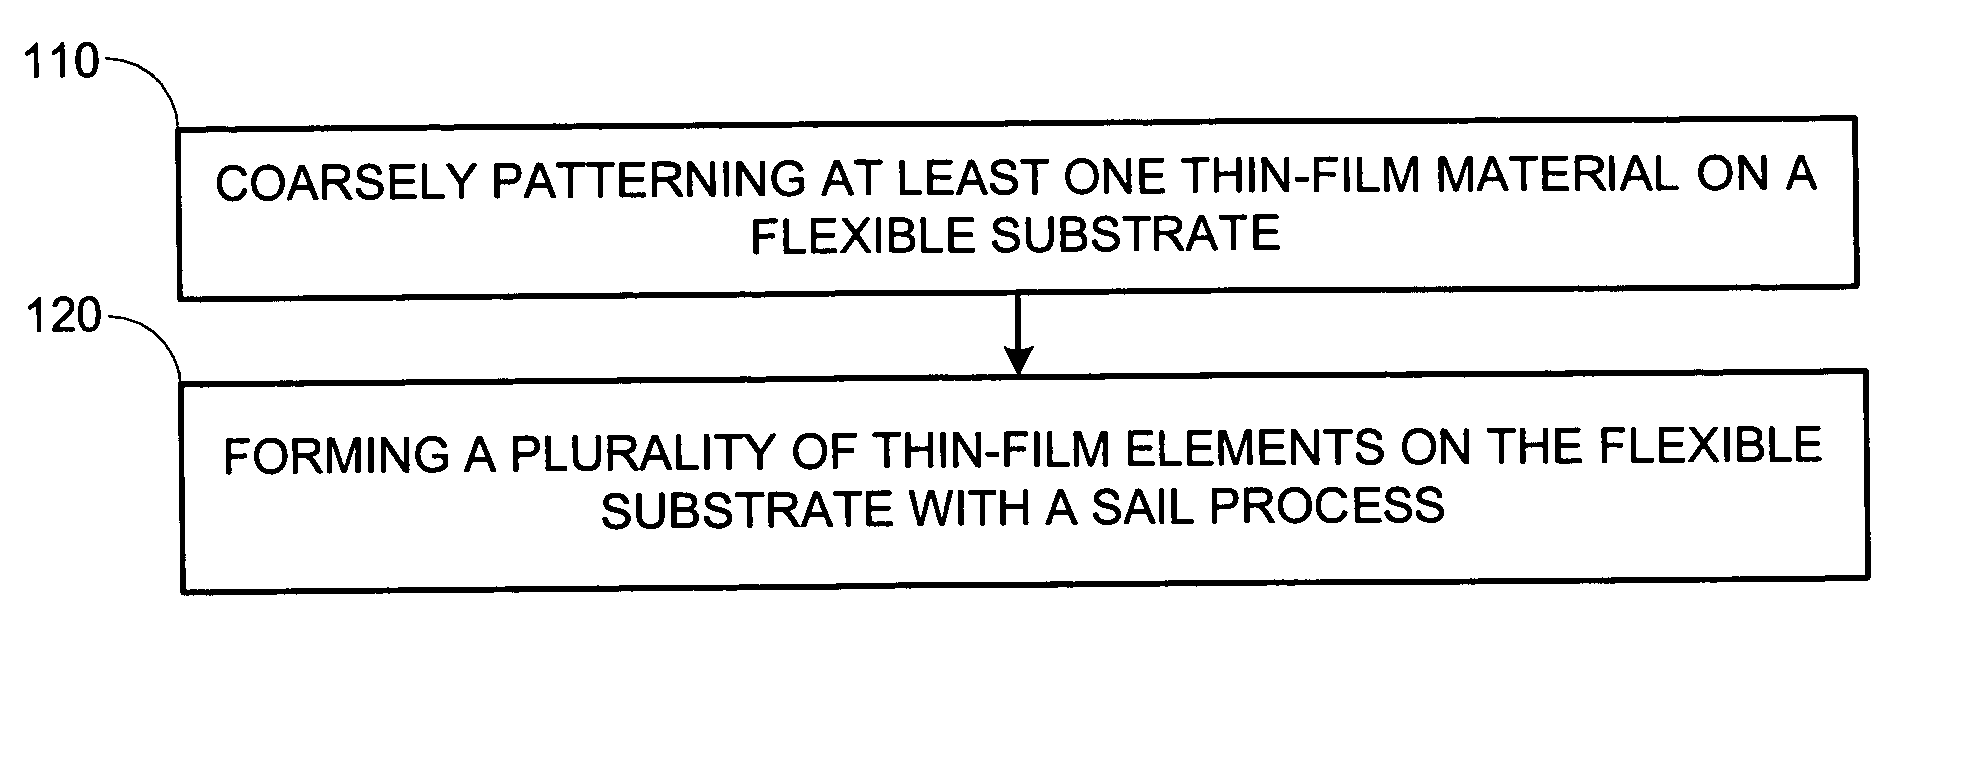 Forming a plurality of thin-film devices